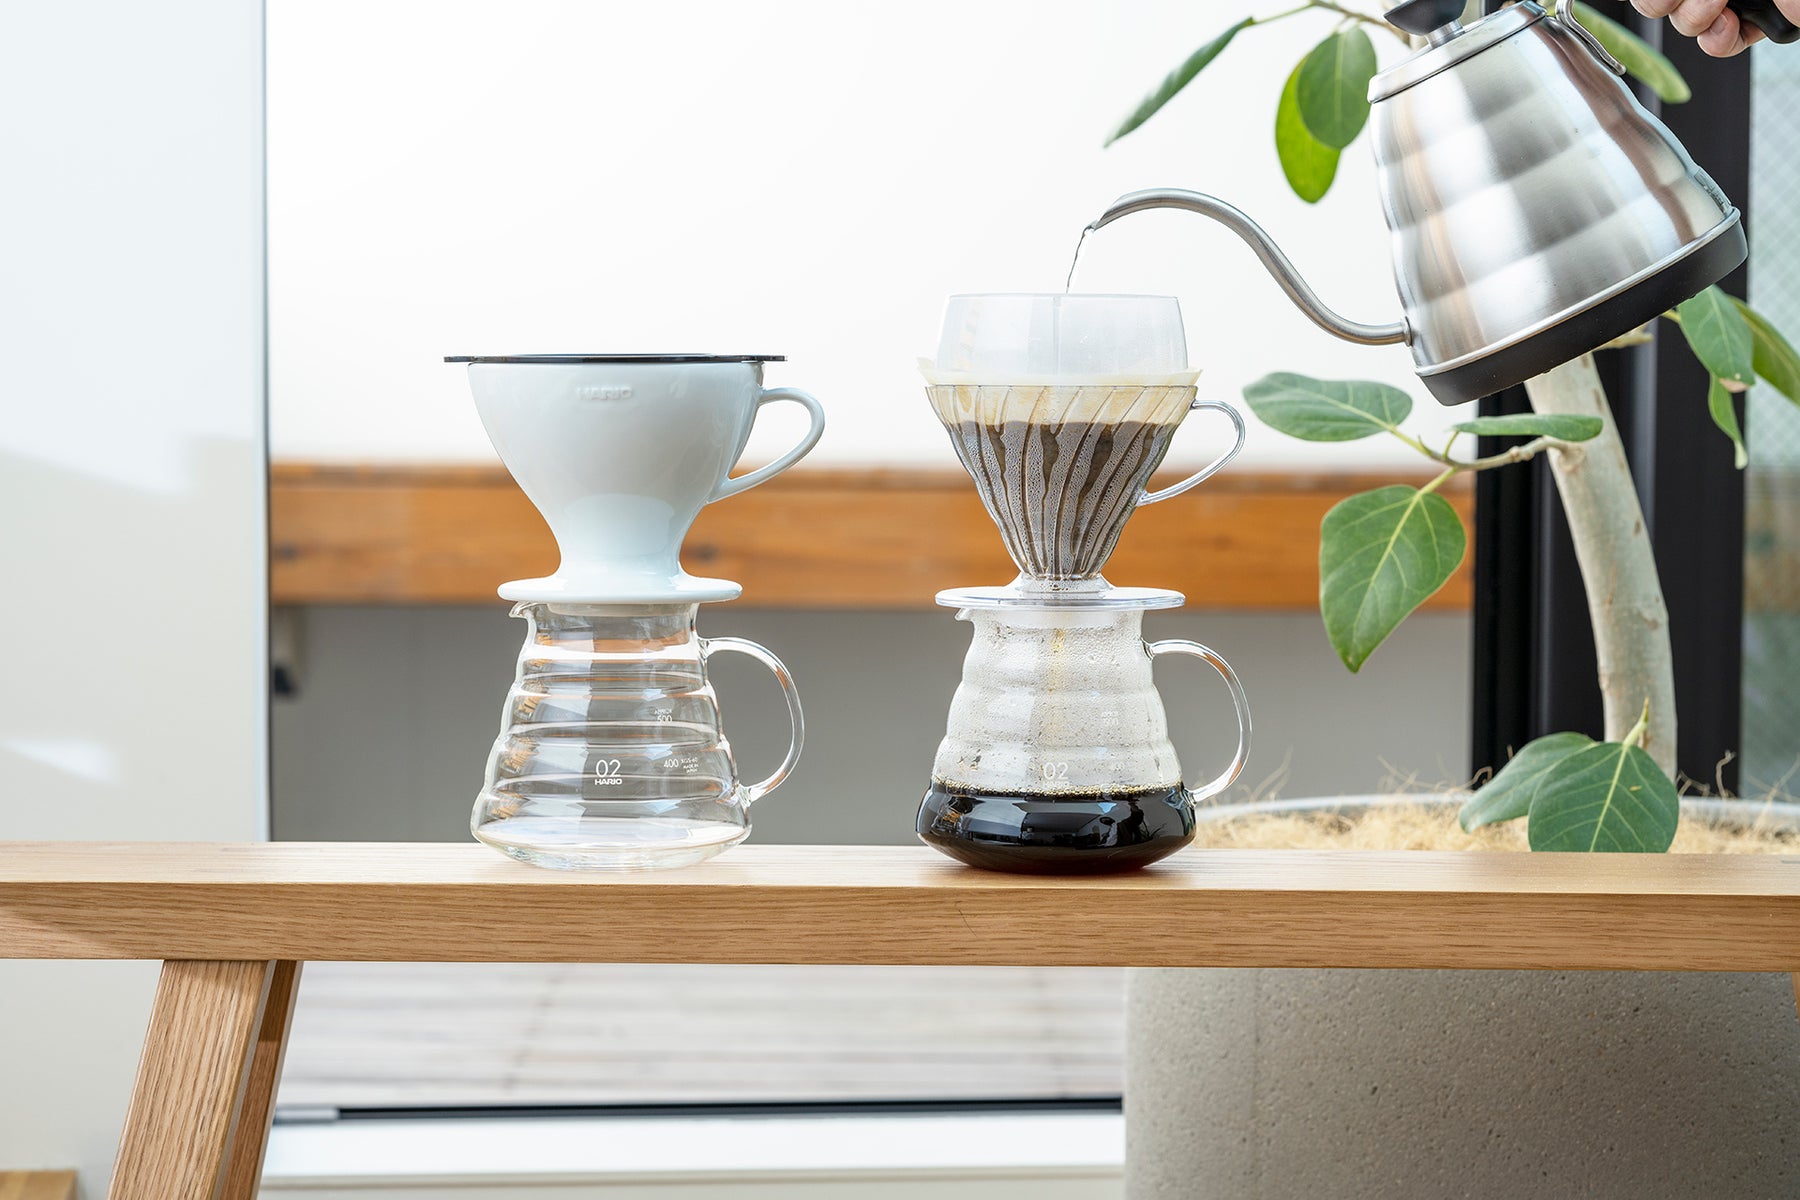 Hario W60 Dripper: Is this Hario’s most versatile coffee dripper yet?